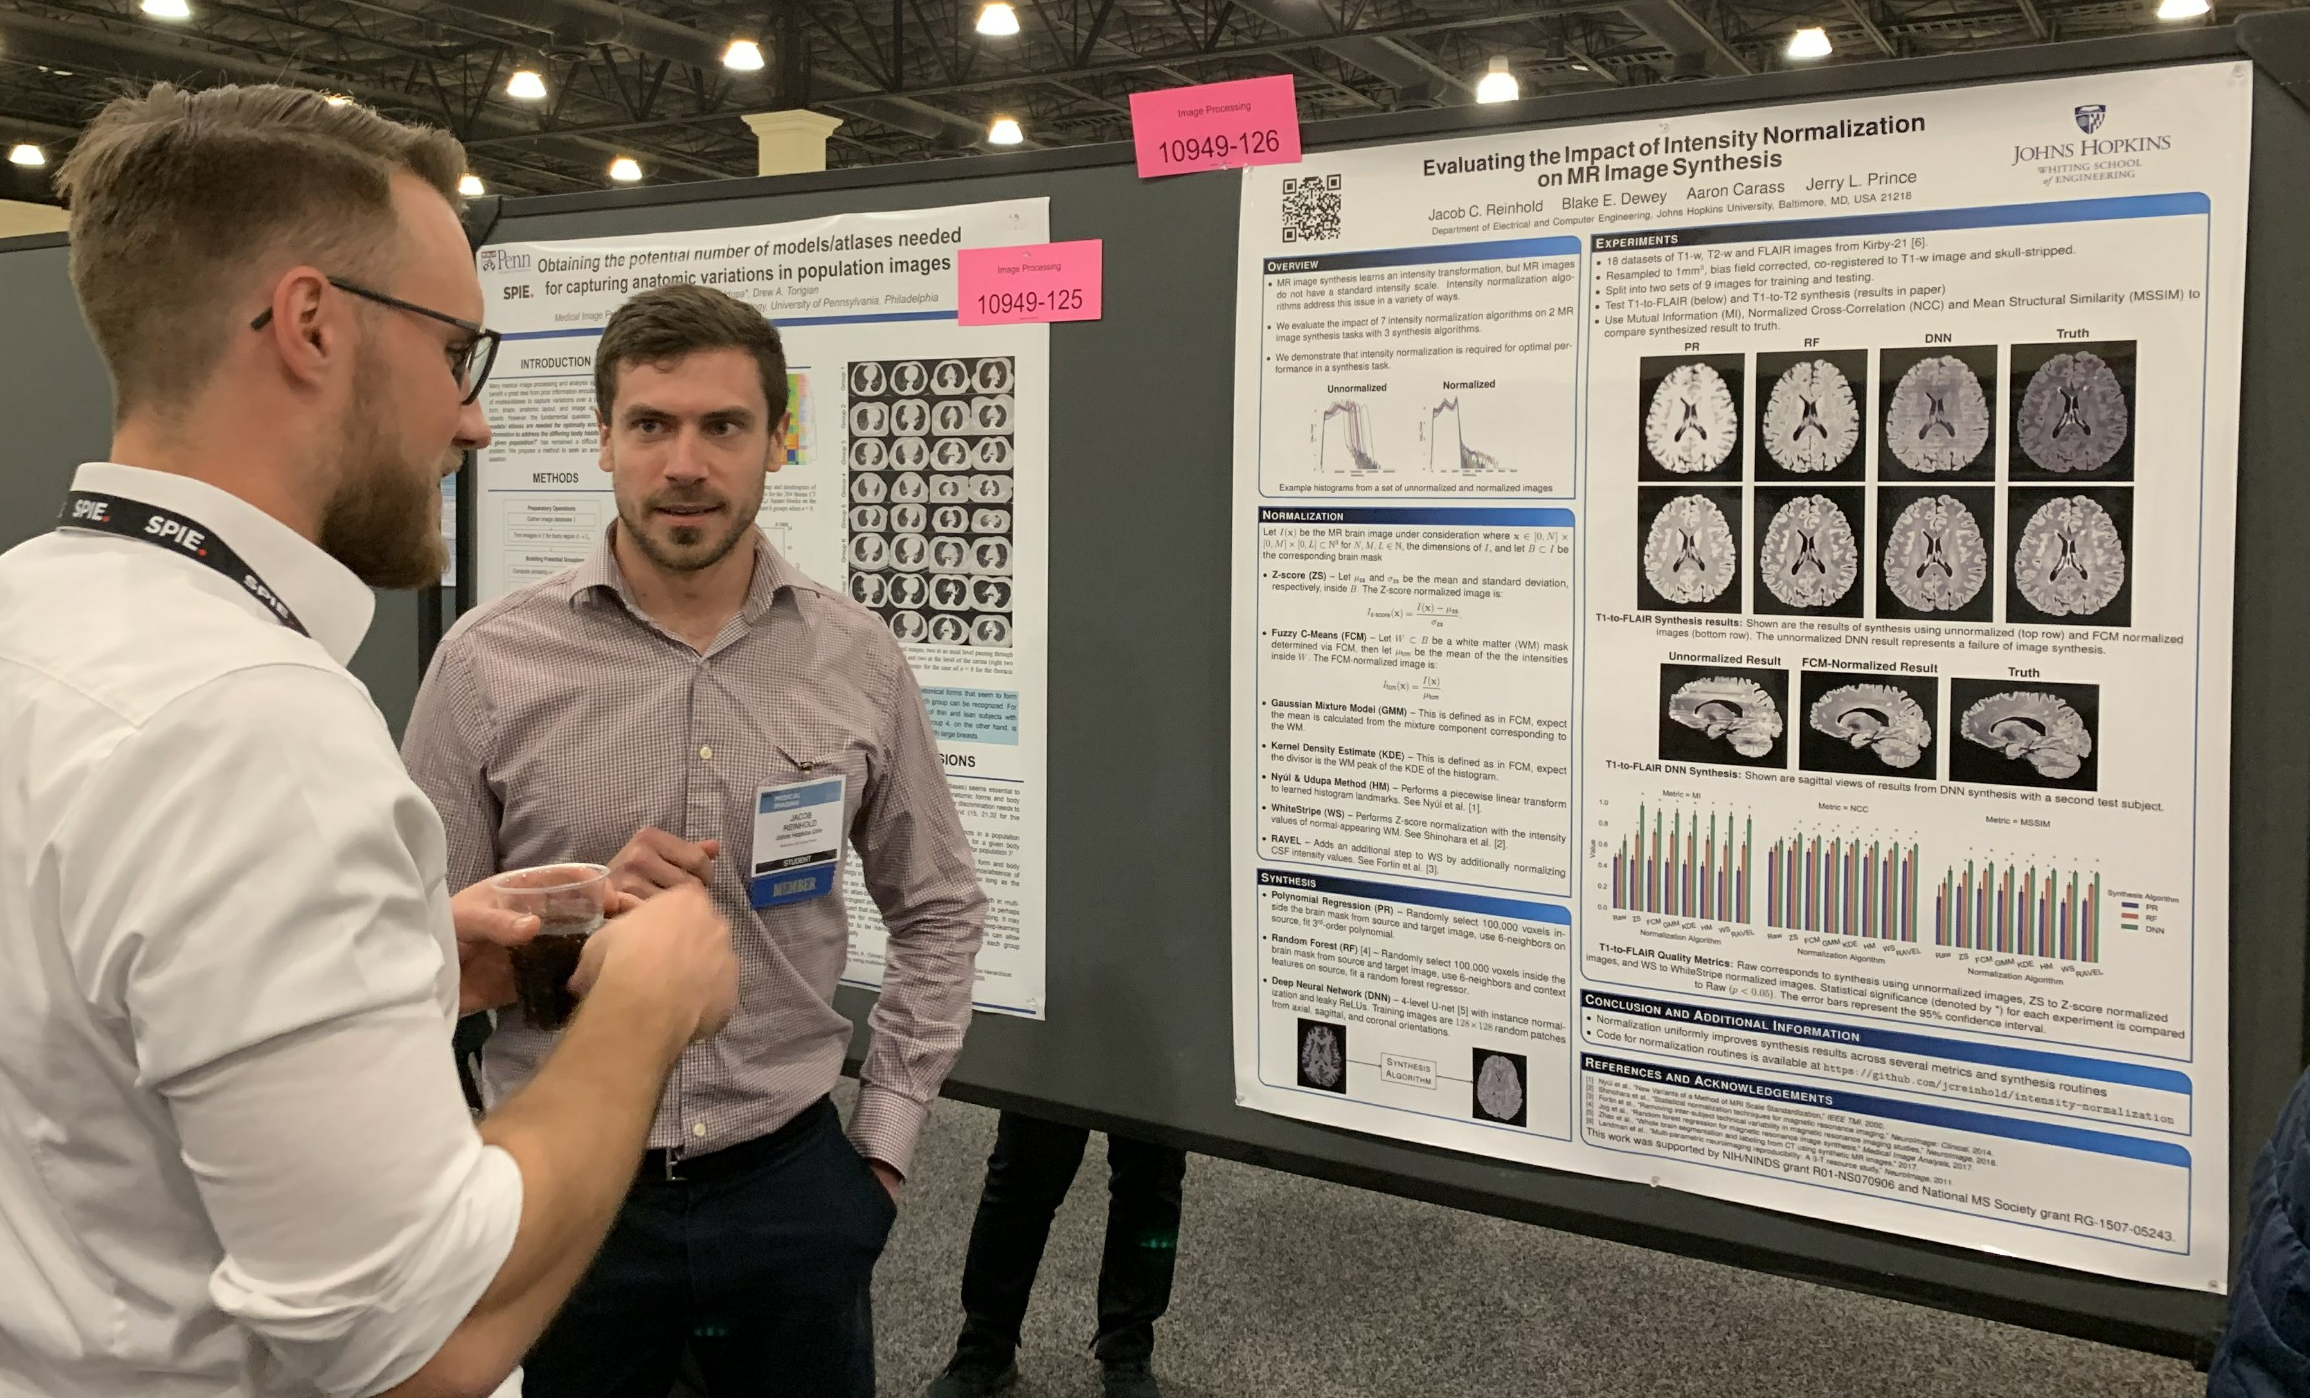 Jacob Reinhold discussing his poster at SPIE-MI 2019 in San Diego.